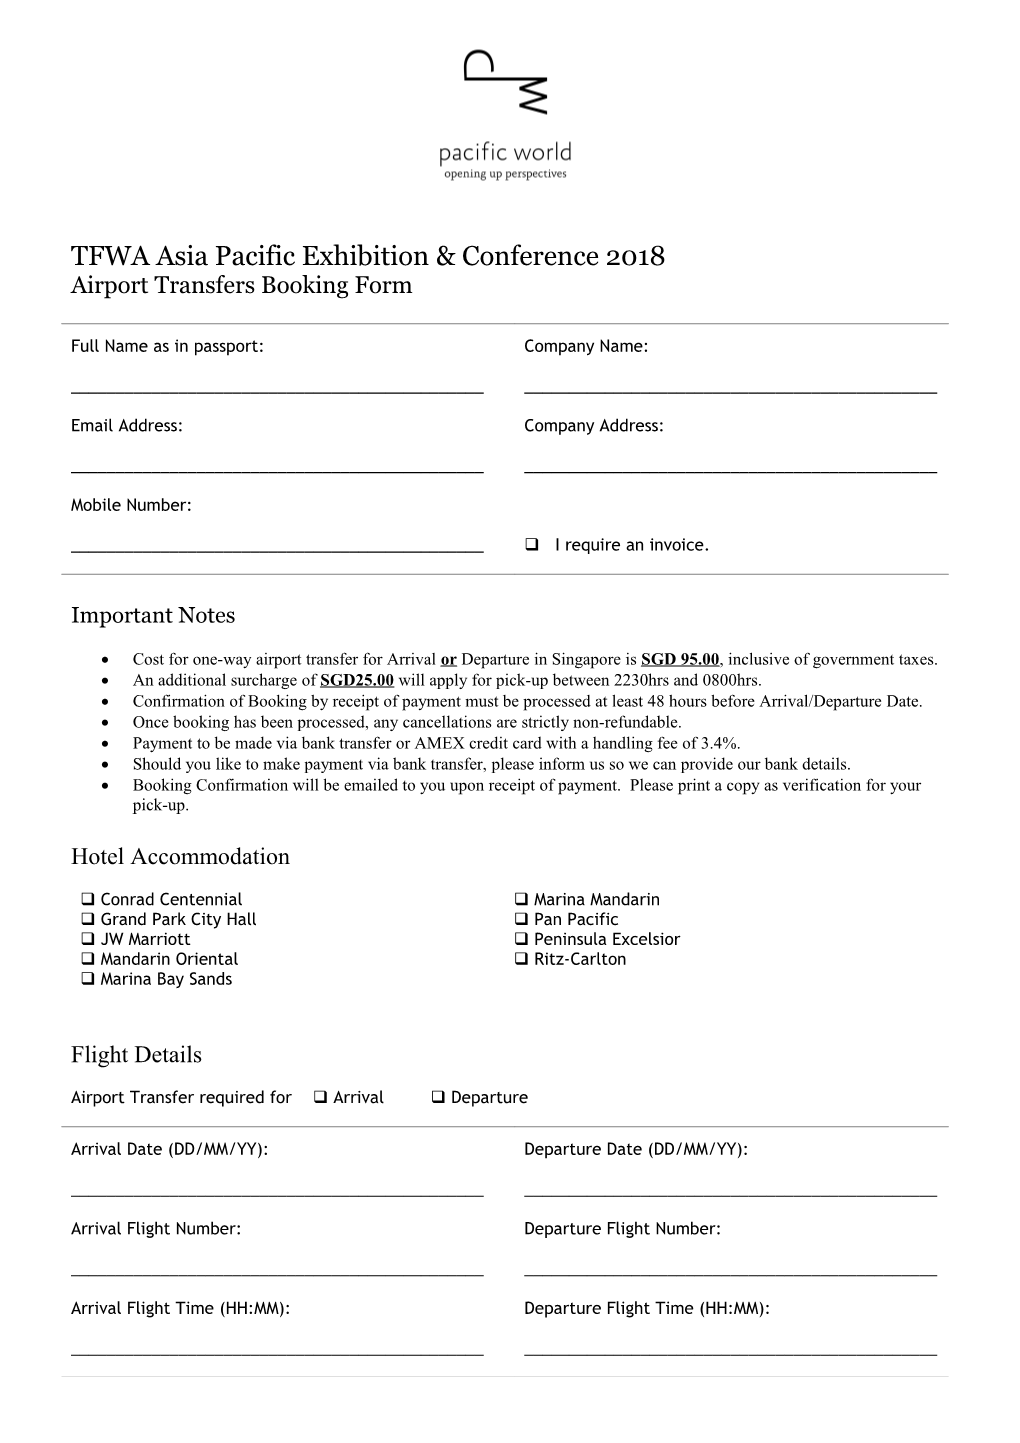 Pacific World Meetings & Events Singapore Pte Ltd